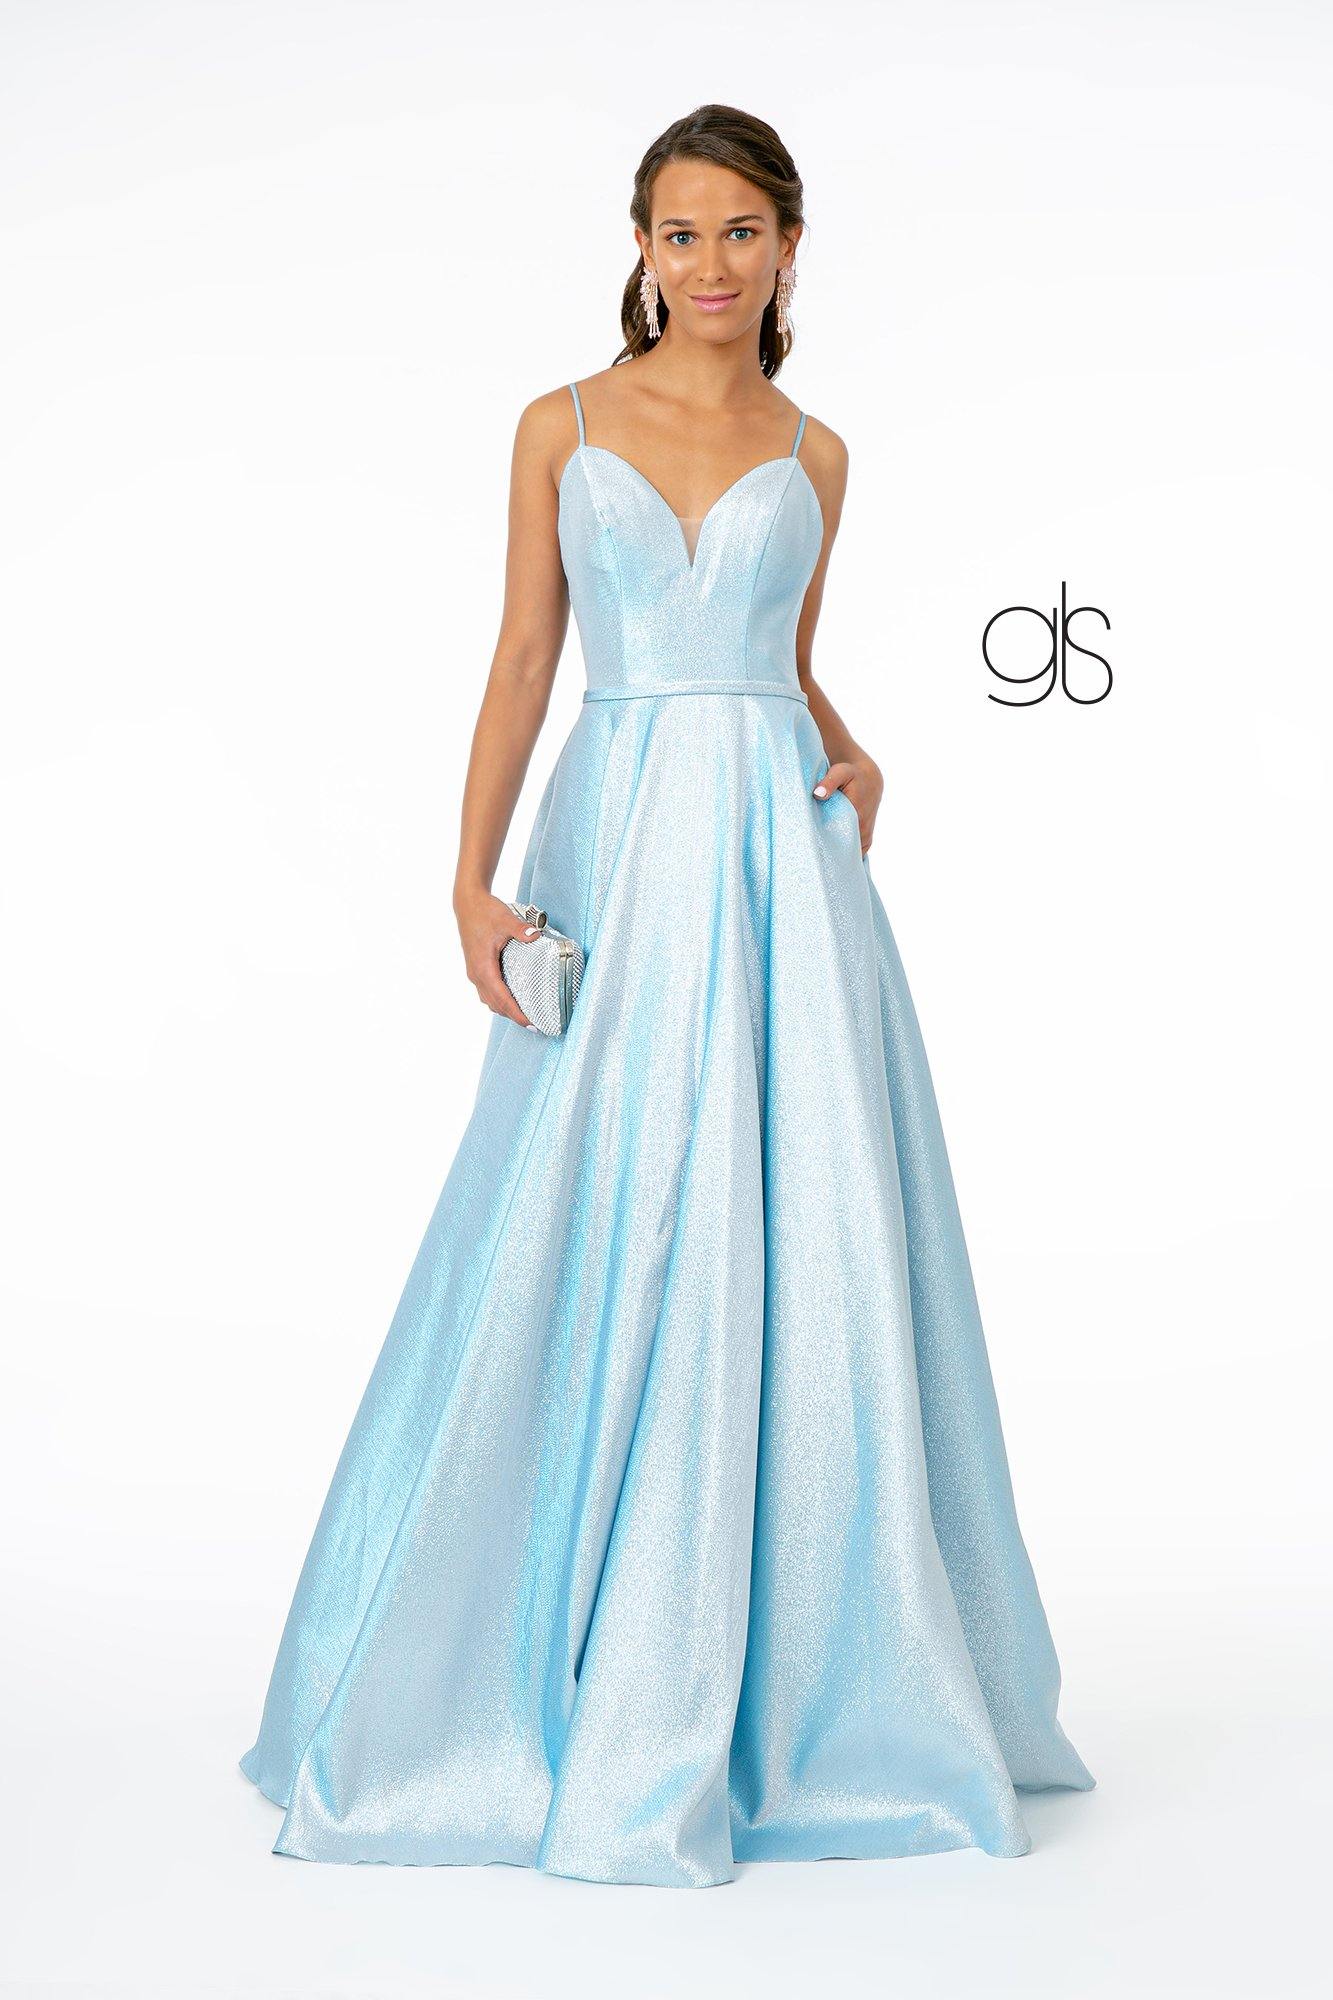 Baby Blue Spaghetti Strap Sweetheart A-Line Long Prom Dress for $181.99 ...